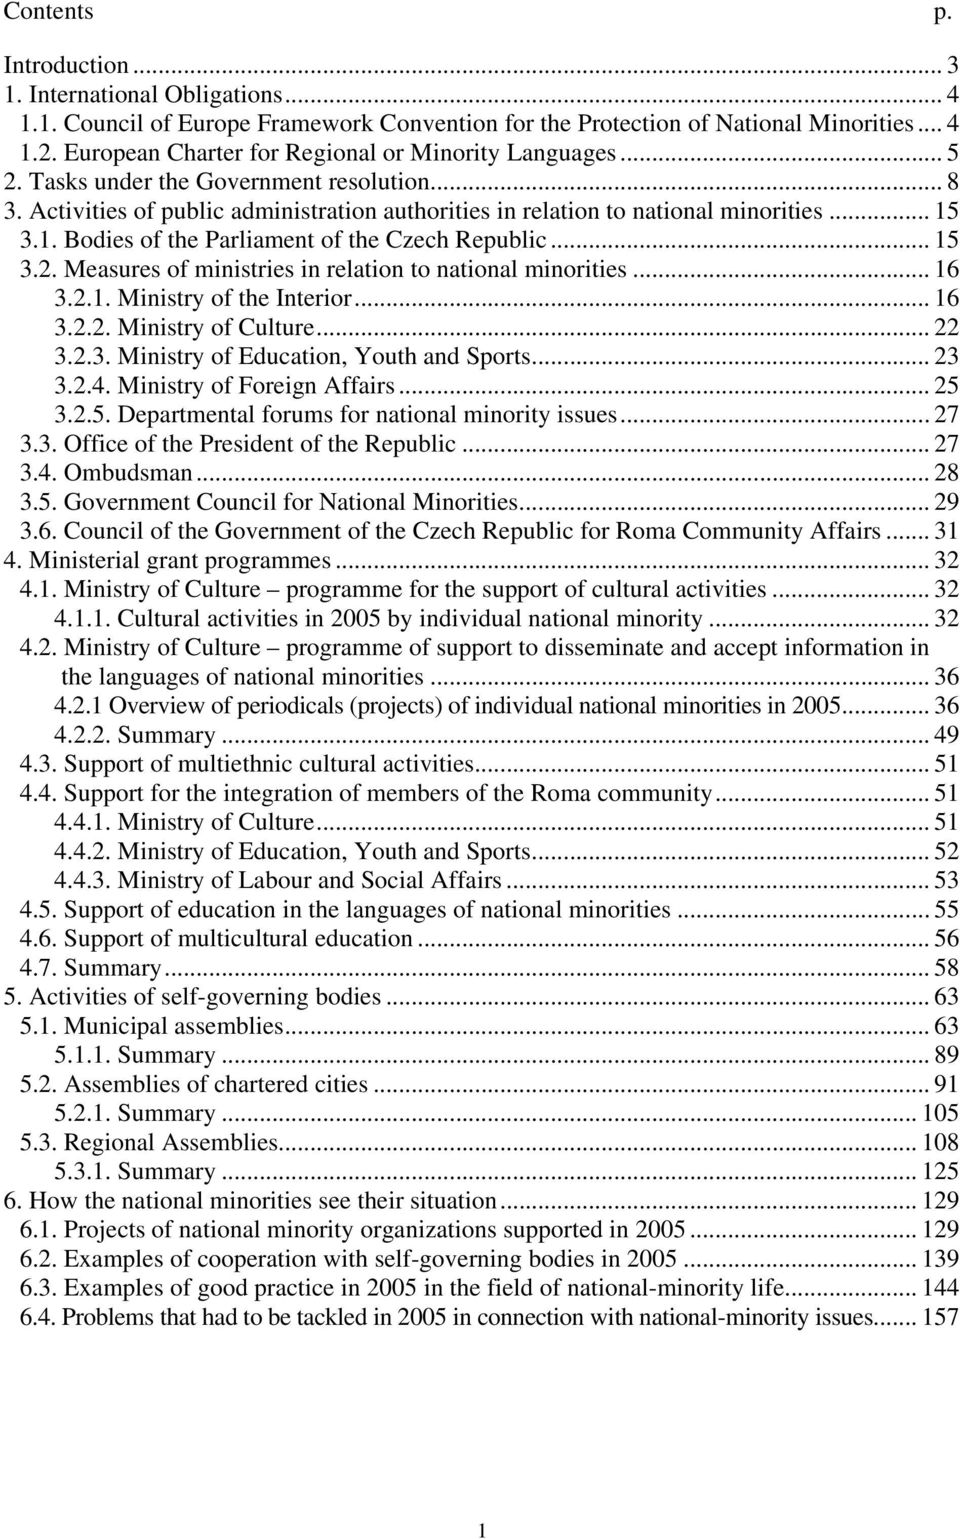 3.1. Bodies of the Parliament of the Czech Republic... 15 3.2. Measures of ministries in relation to national minorities... 16 3.2.1. Ministry of the Interior... 16 3.2.2. Ministry of Culture... 22 3.